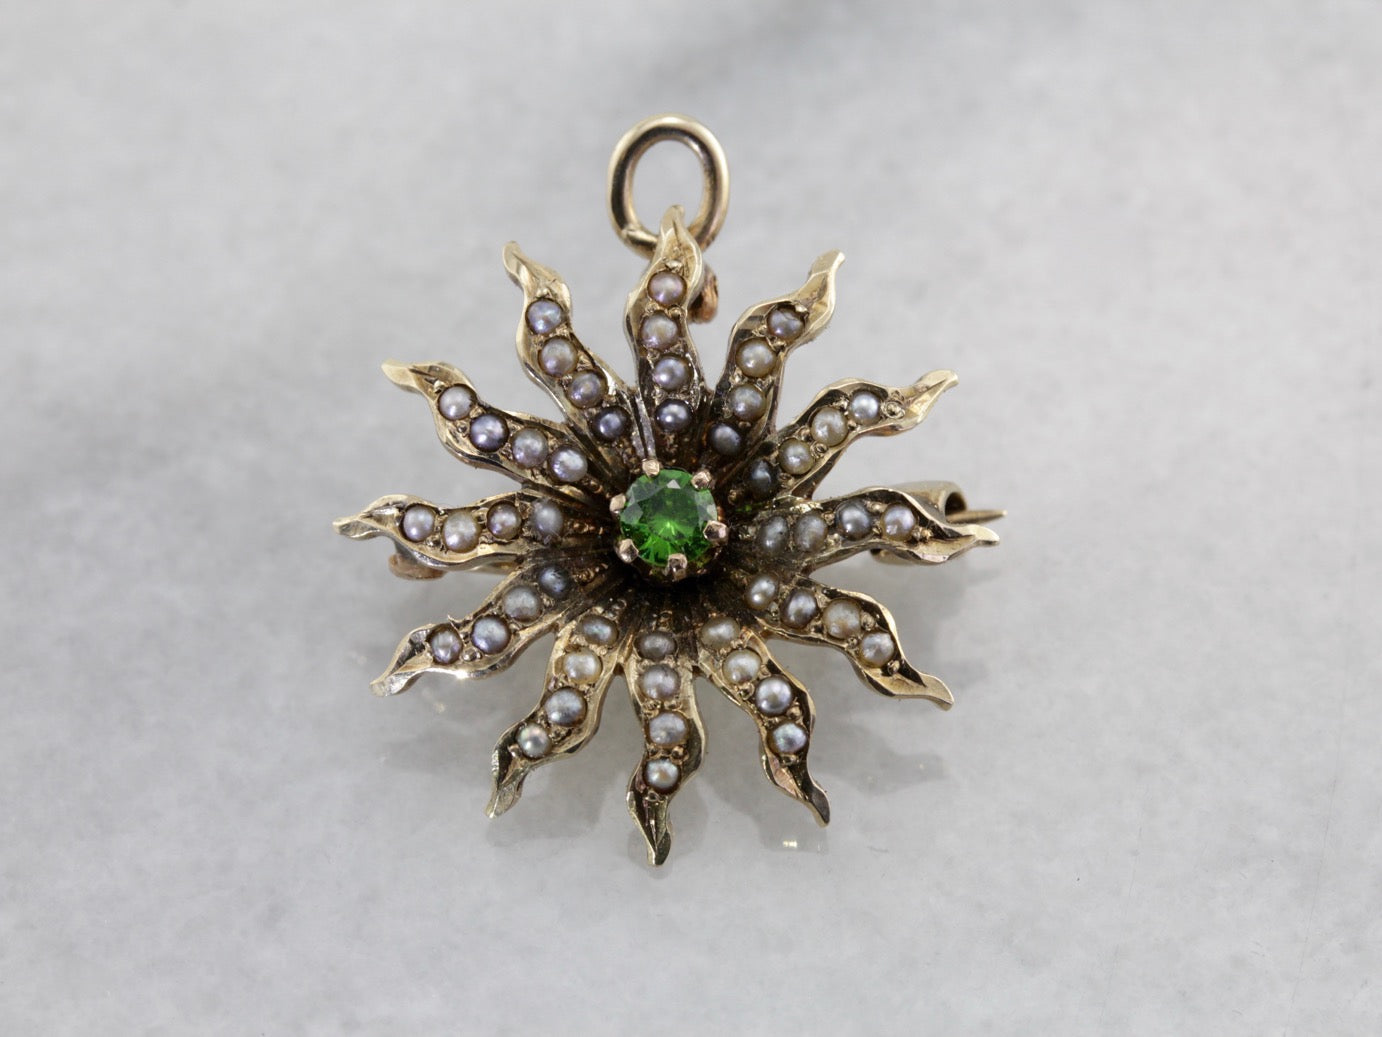 Market Square Jewelers Antique Seed Pearl Starburst Brooch